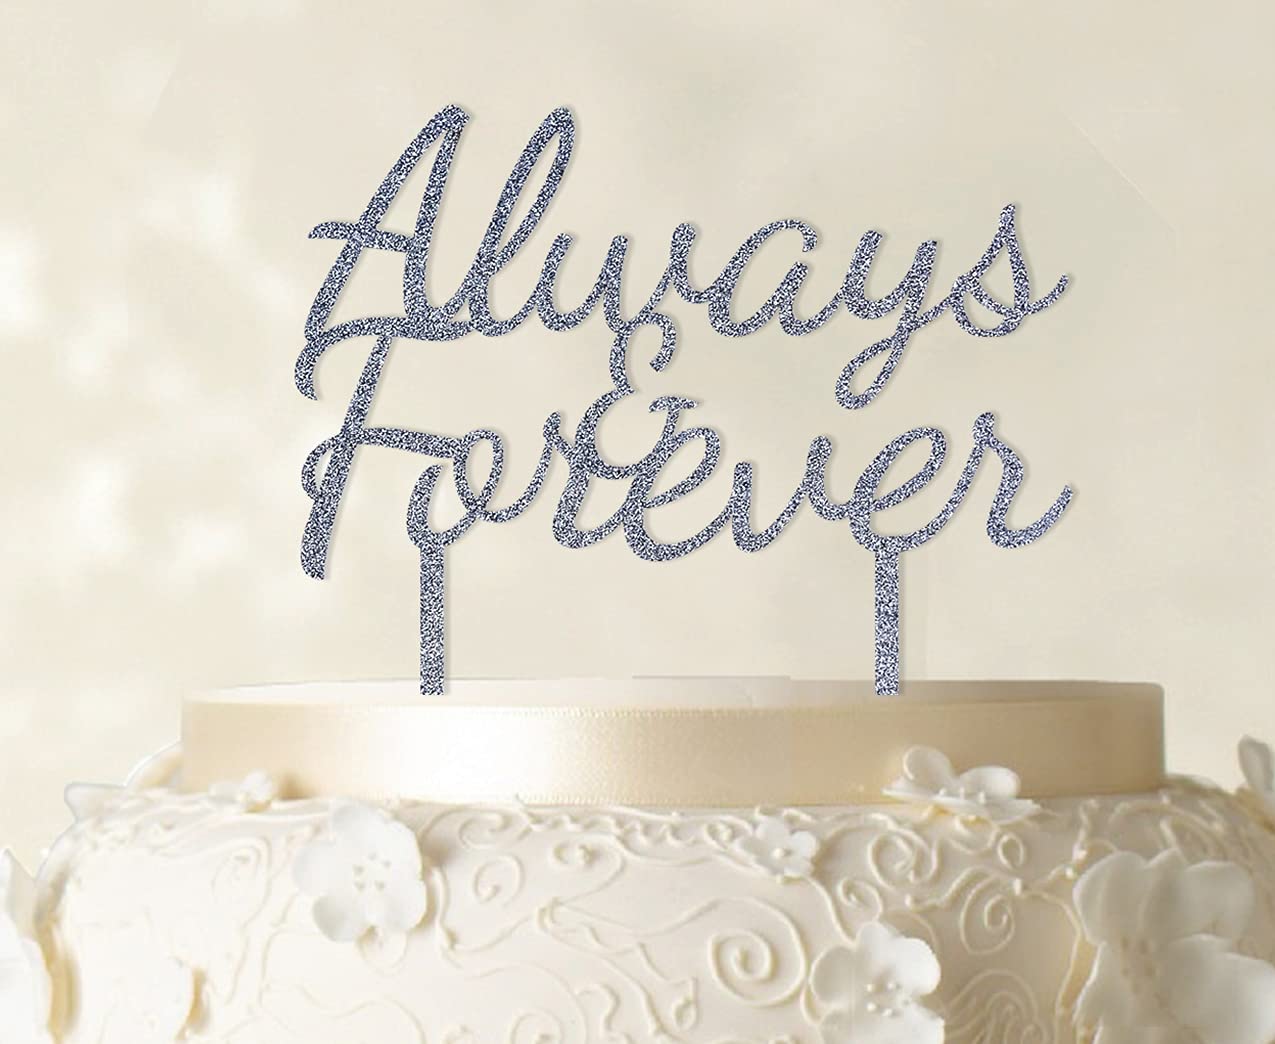 Printtoo Always & Forever custom Wedding cake Topper Personalized glitter Silver cake Topper color Option Available 6-7 Inches W